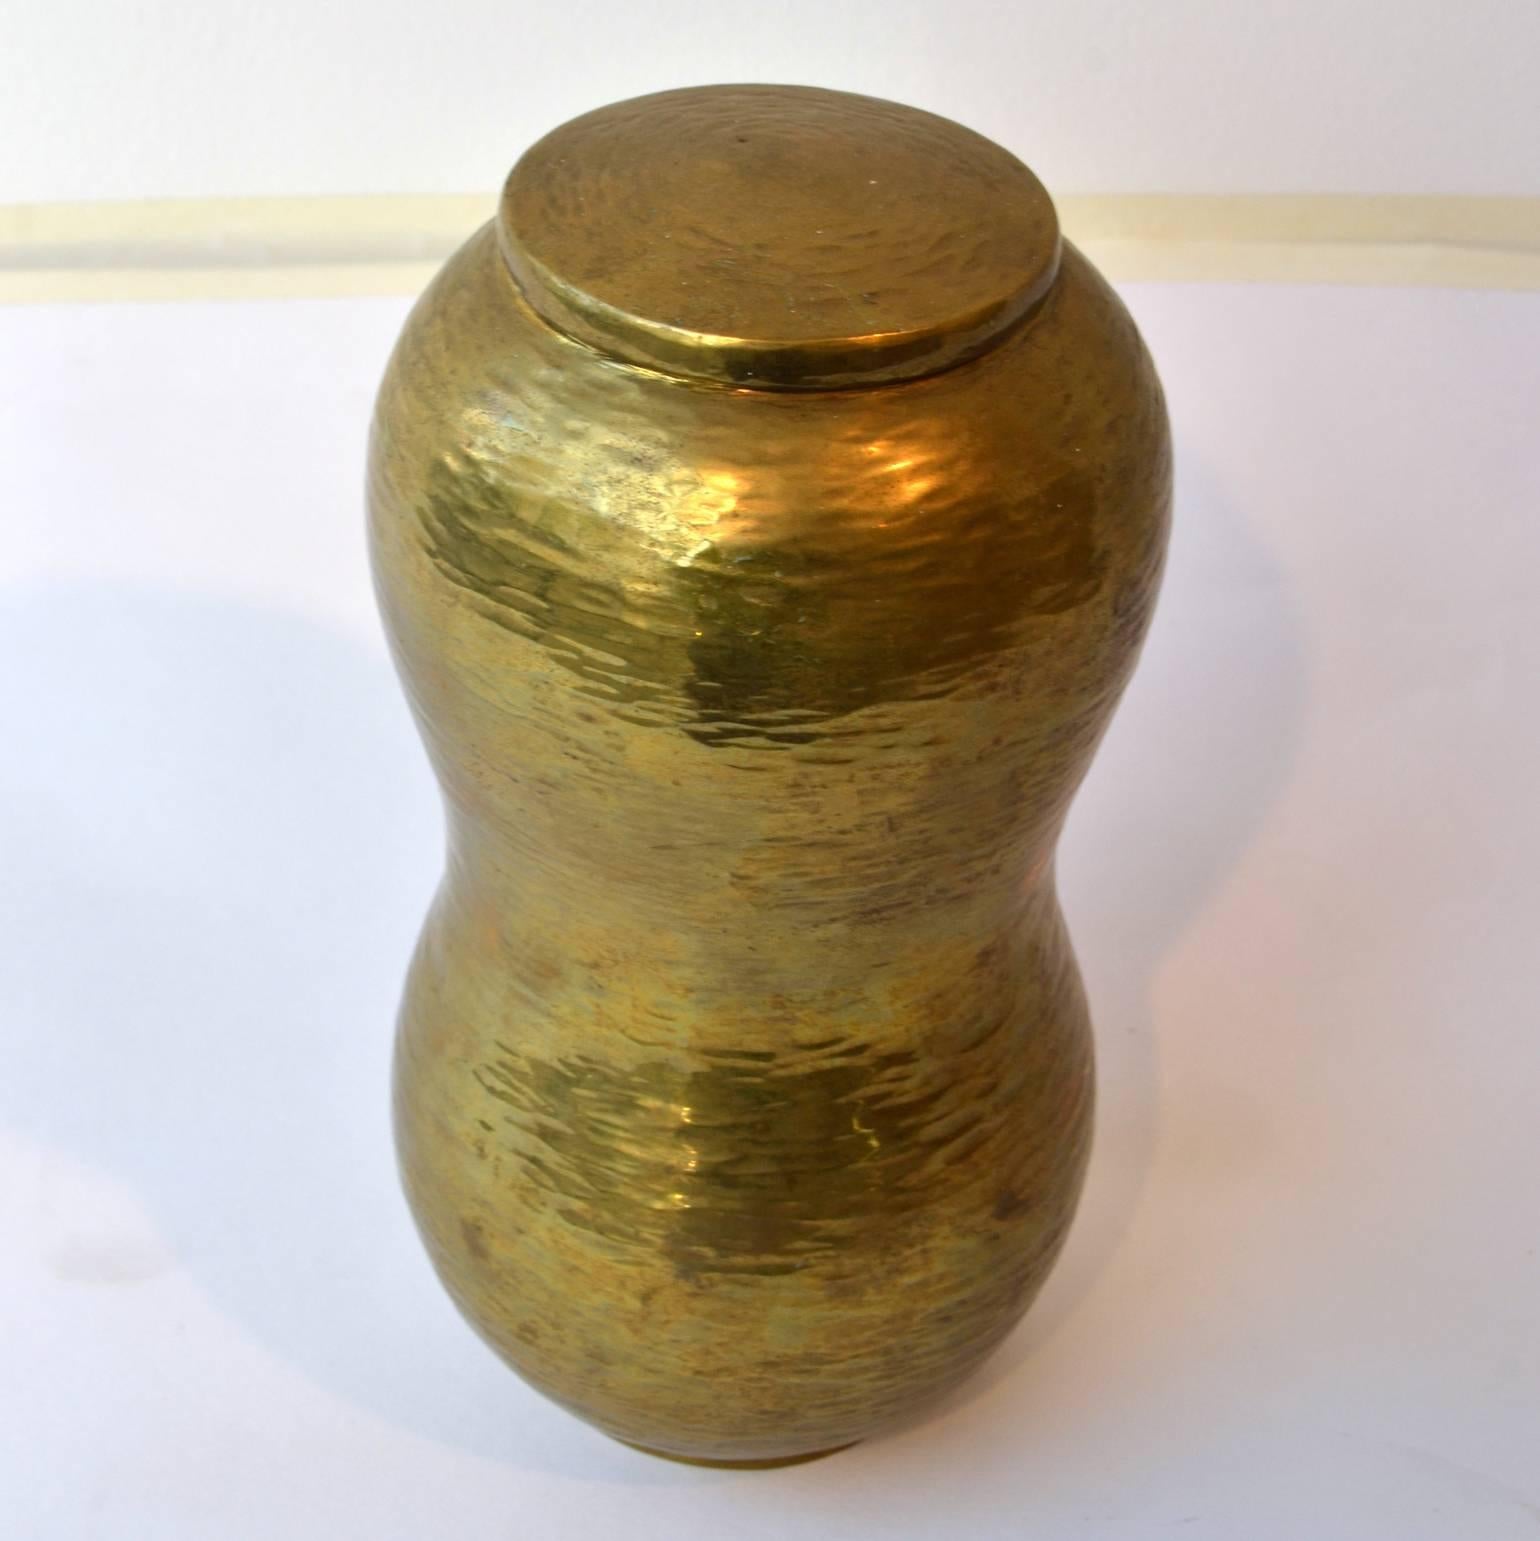 Tactile and curvaceous hand driven brass vessel or container with lid signed Franz J. Peters Stolberg RH, Peters, 1913-1977. In this handcrafted container the traces of his hand driven tools are visible and decorative. Peters was a blacksmith and